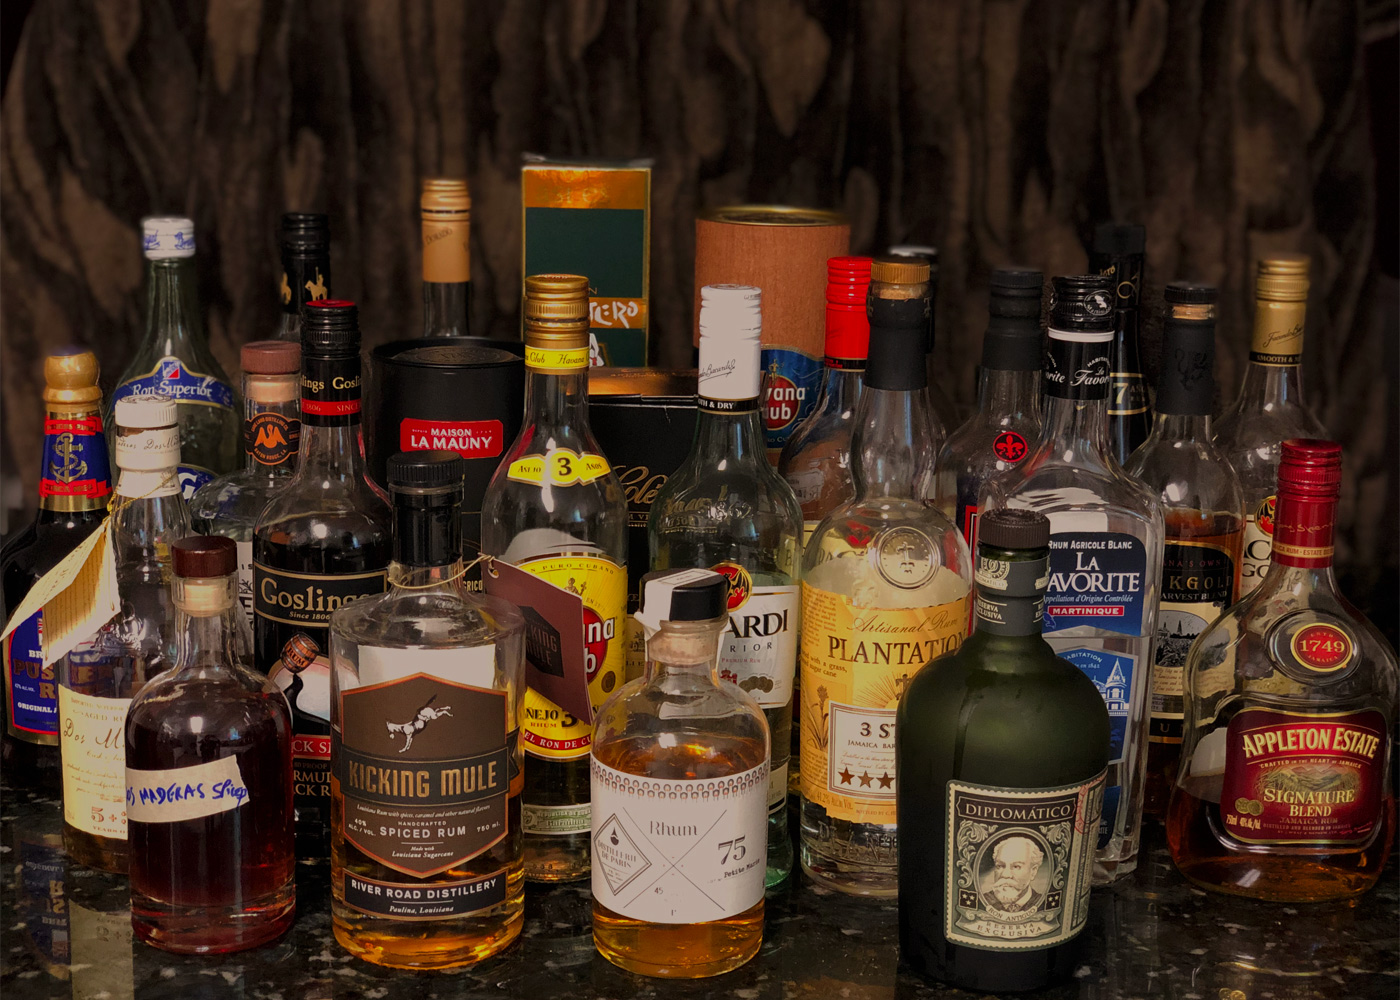 My current rum collection